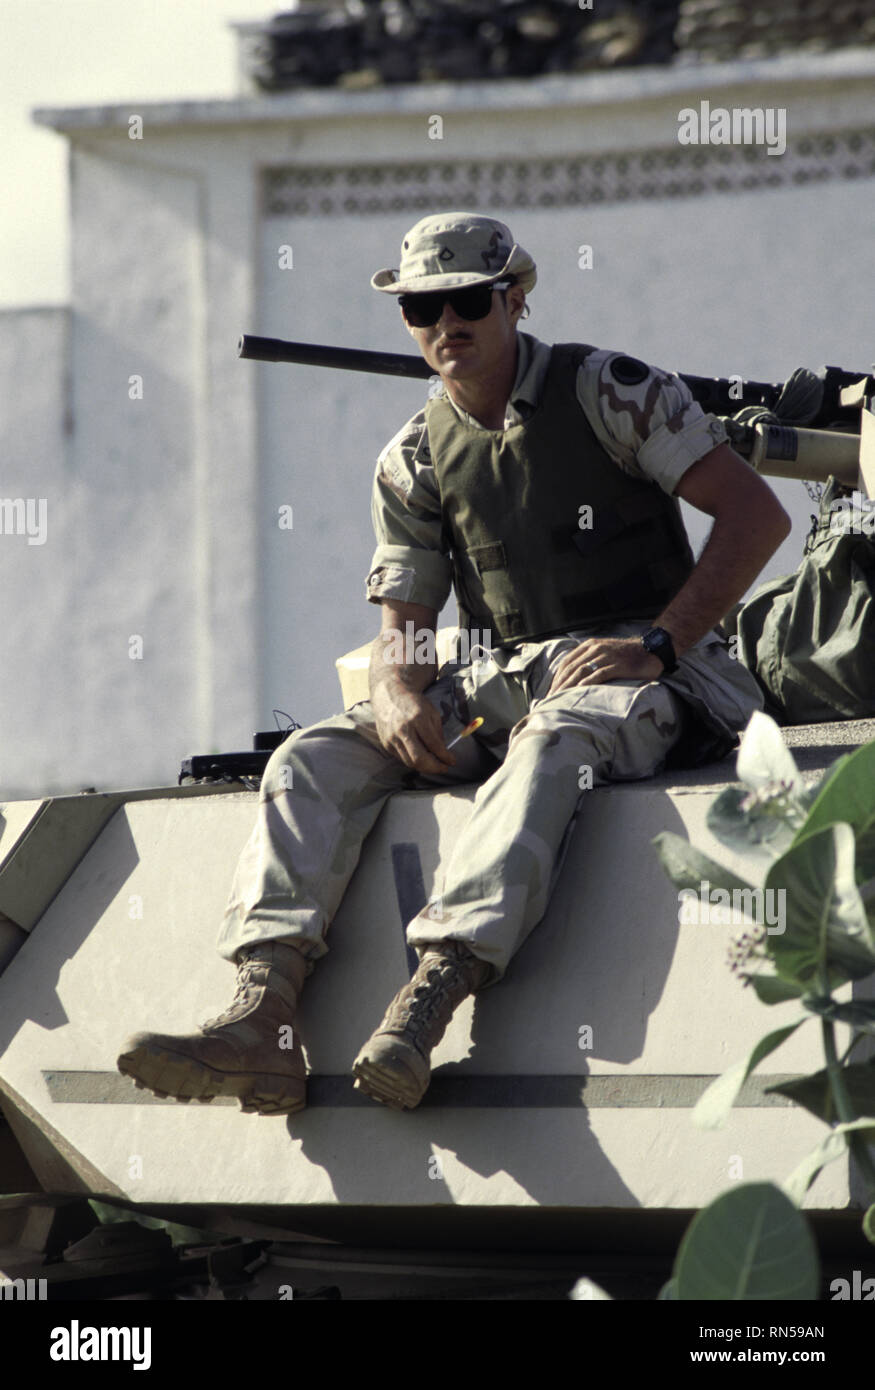 16th October 1993 A U.S. Army soldier of the 24th Infantry Division, 1st Battalion of the 64th Armored Regiment, sits on his M1A1 Abrams tank at UNOSOM Headquarters in Mogadishu, Somalia. Stock Photo